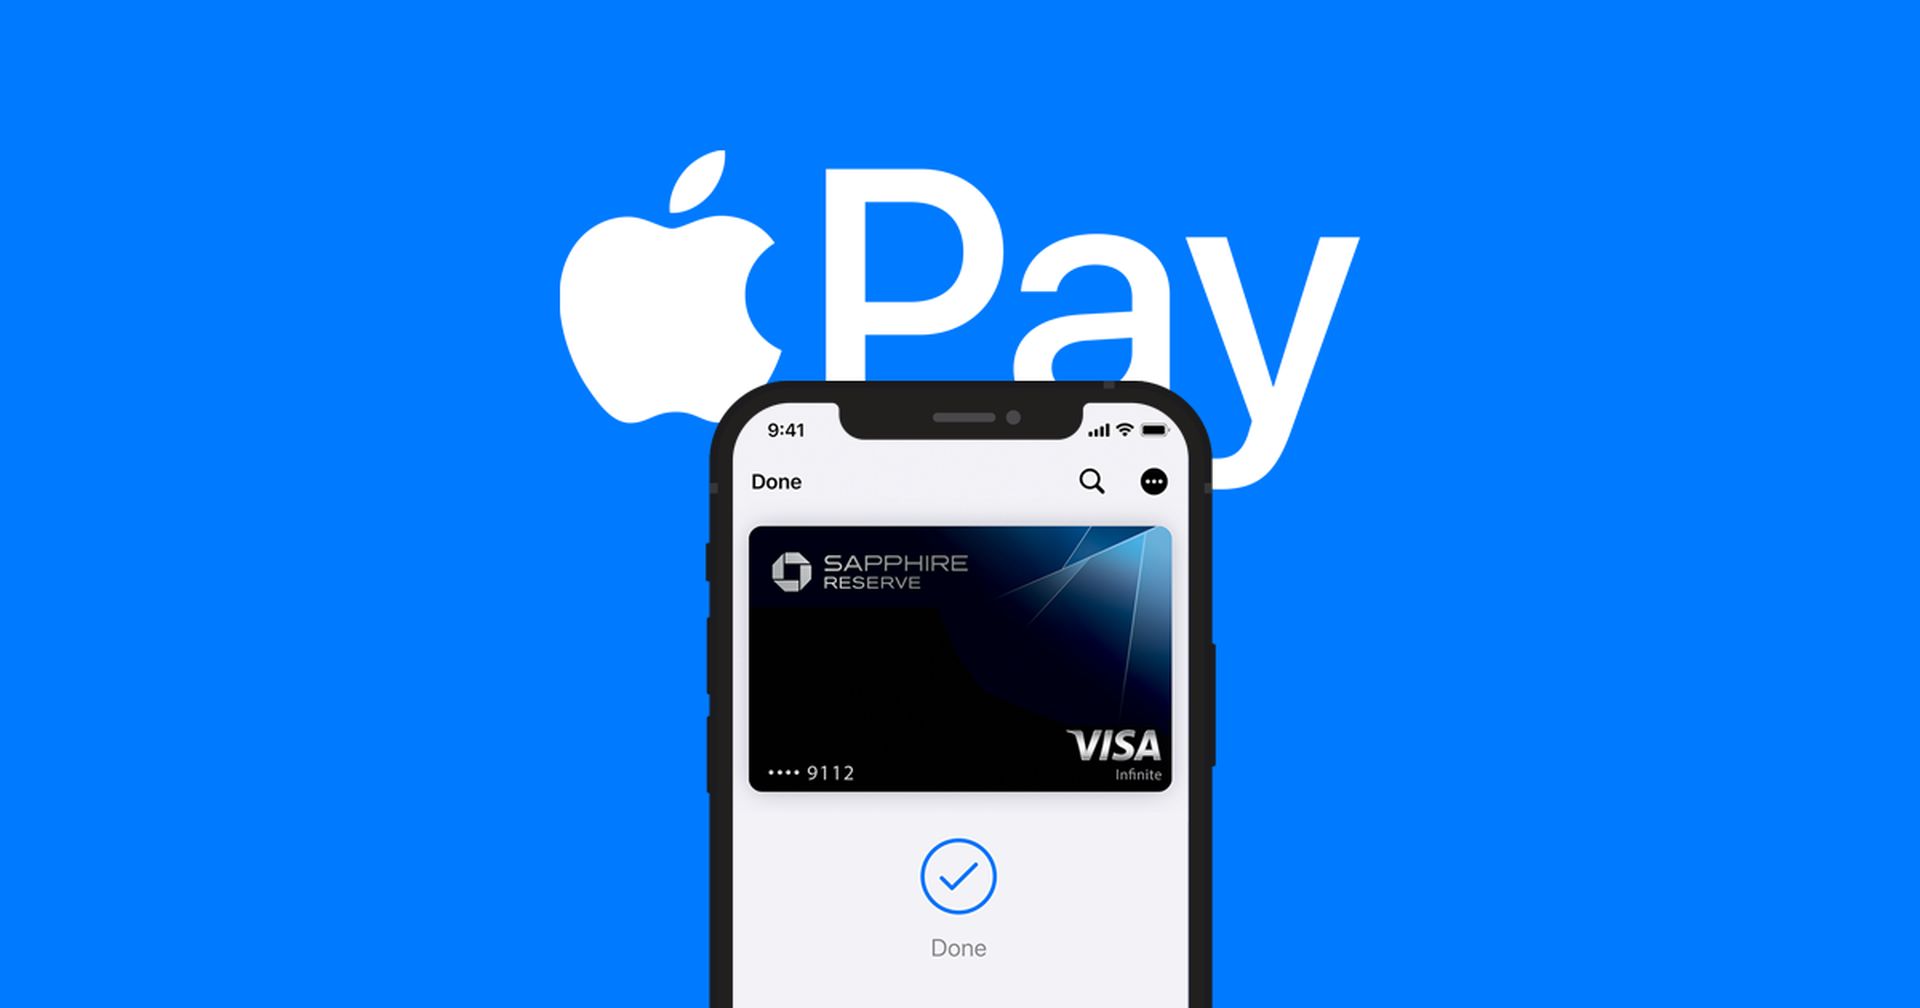 In this article, we are going to be covering Apple Pay on iOS 16, which might finally add 3rd party browser support.